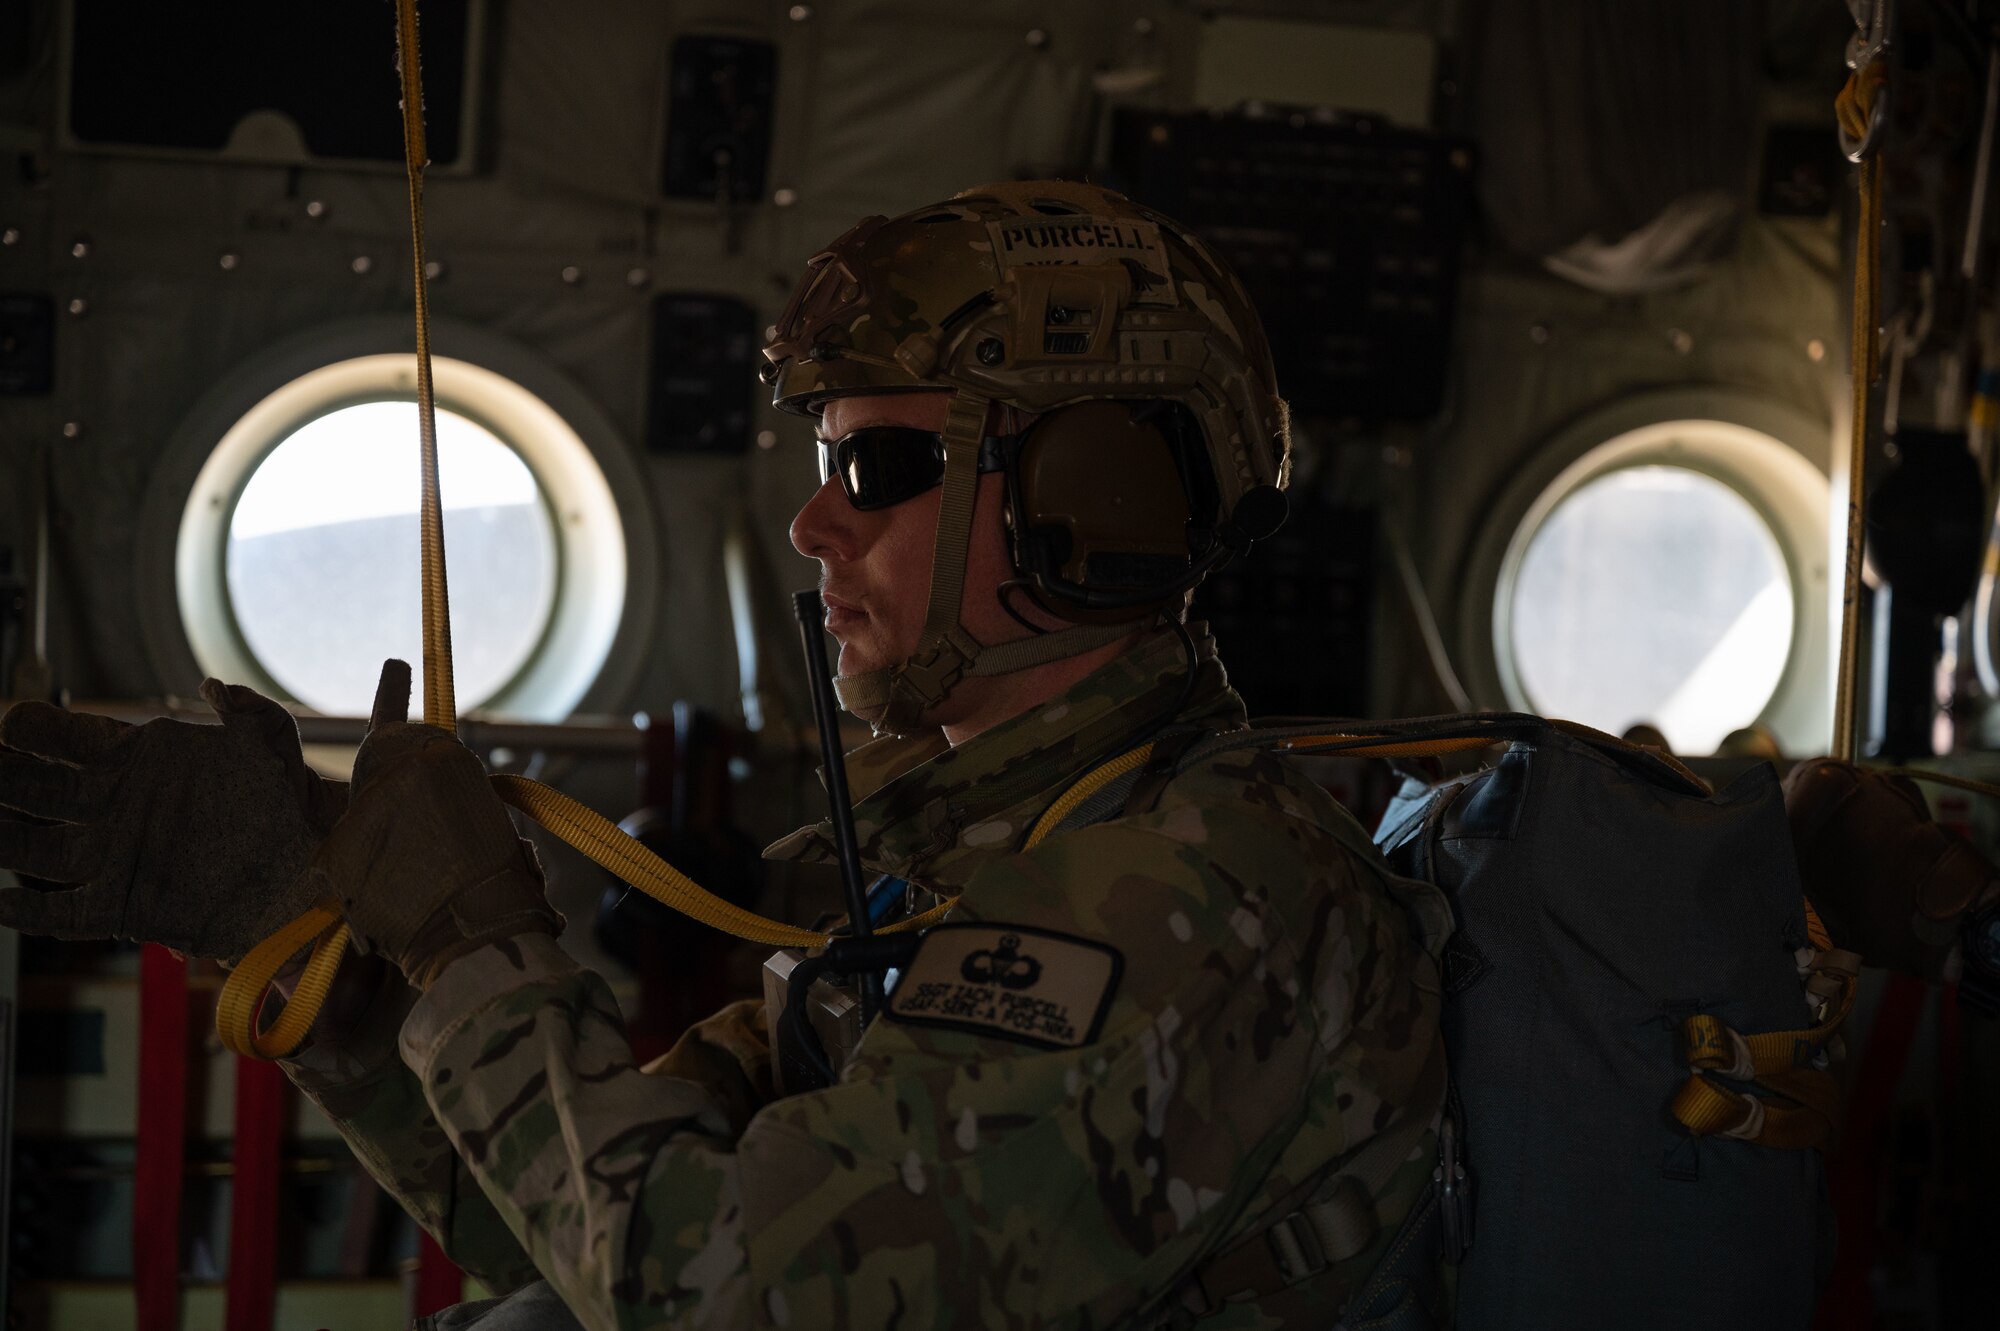 U.S. Air Force Staff Sgt. Zachary Purcell, a 414th Combat Training Squadron Survival, Evasion, Resistance and Escape specialist, prepares to execute a static line jump during Red Flag-Nellis 23-2 at Nellis Air Force Base, Nevada, March 16, 2023.